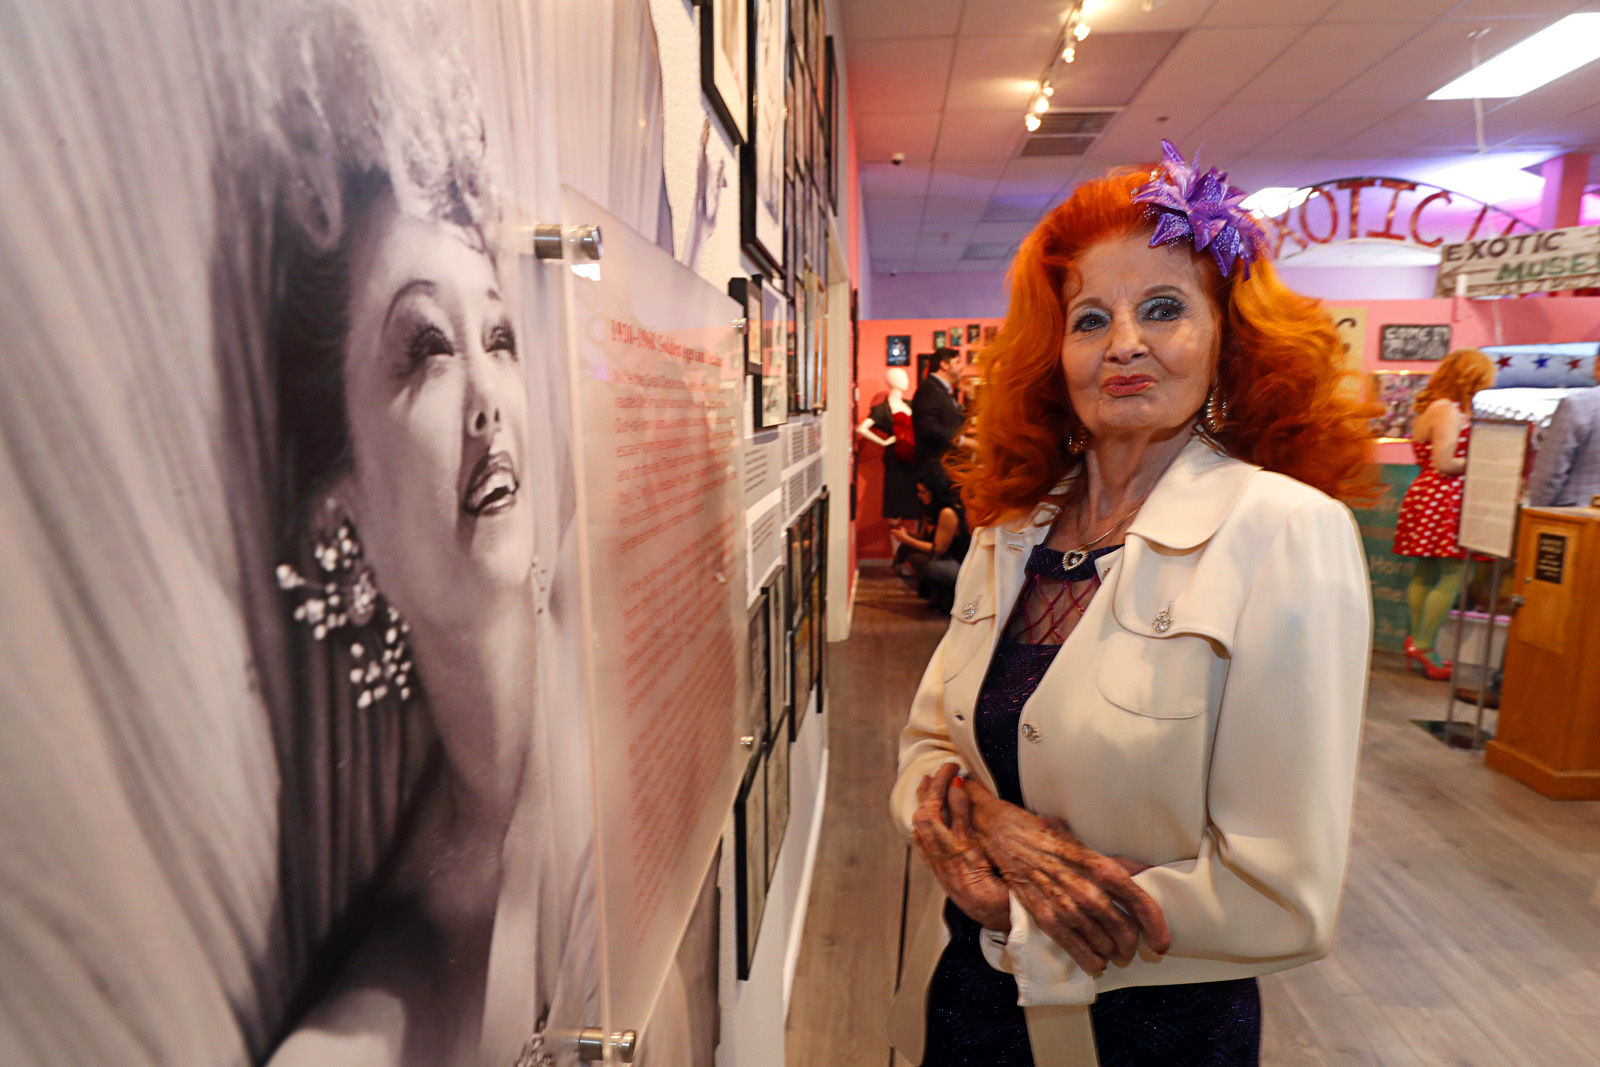 Vegas Showgirls Celebrated at 'French Connection' Exhibit and Event